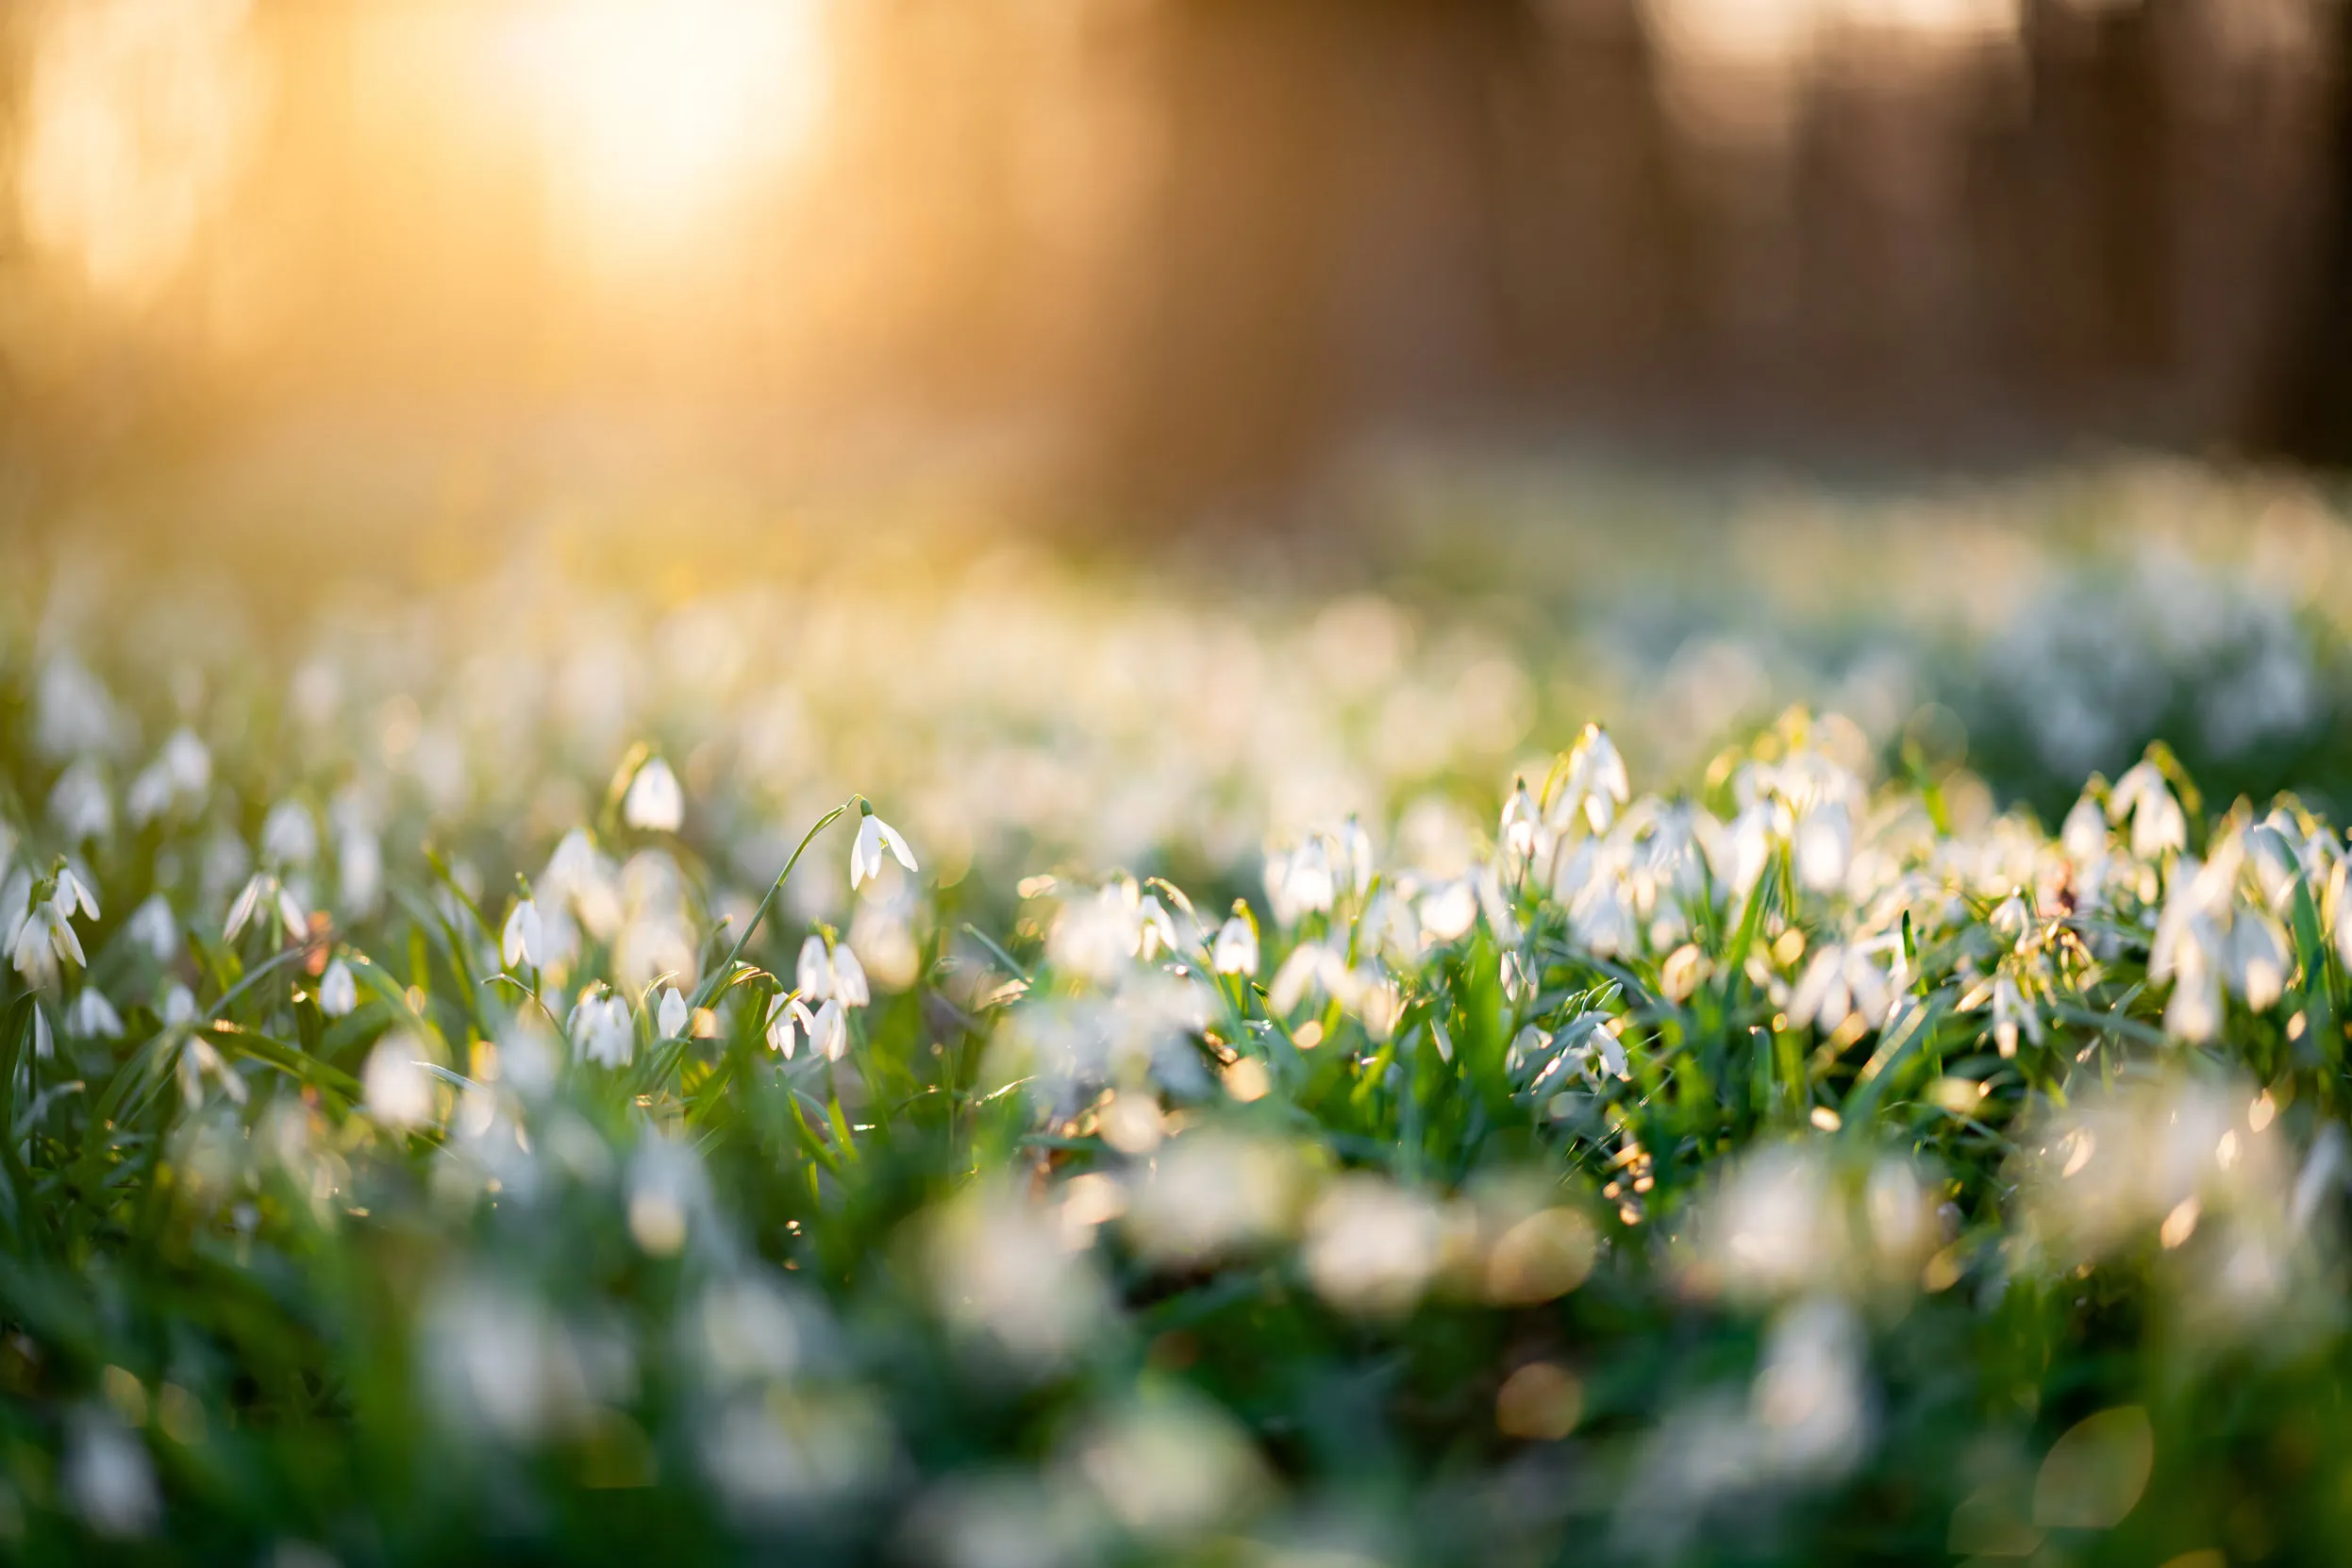 A mass of Snowdrop flowers in a woodland clearing at sunrise.